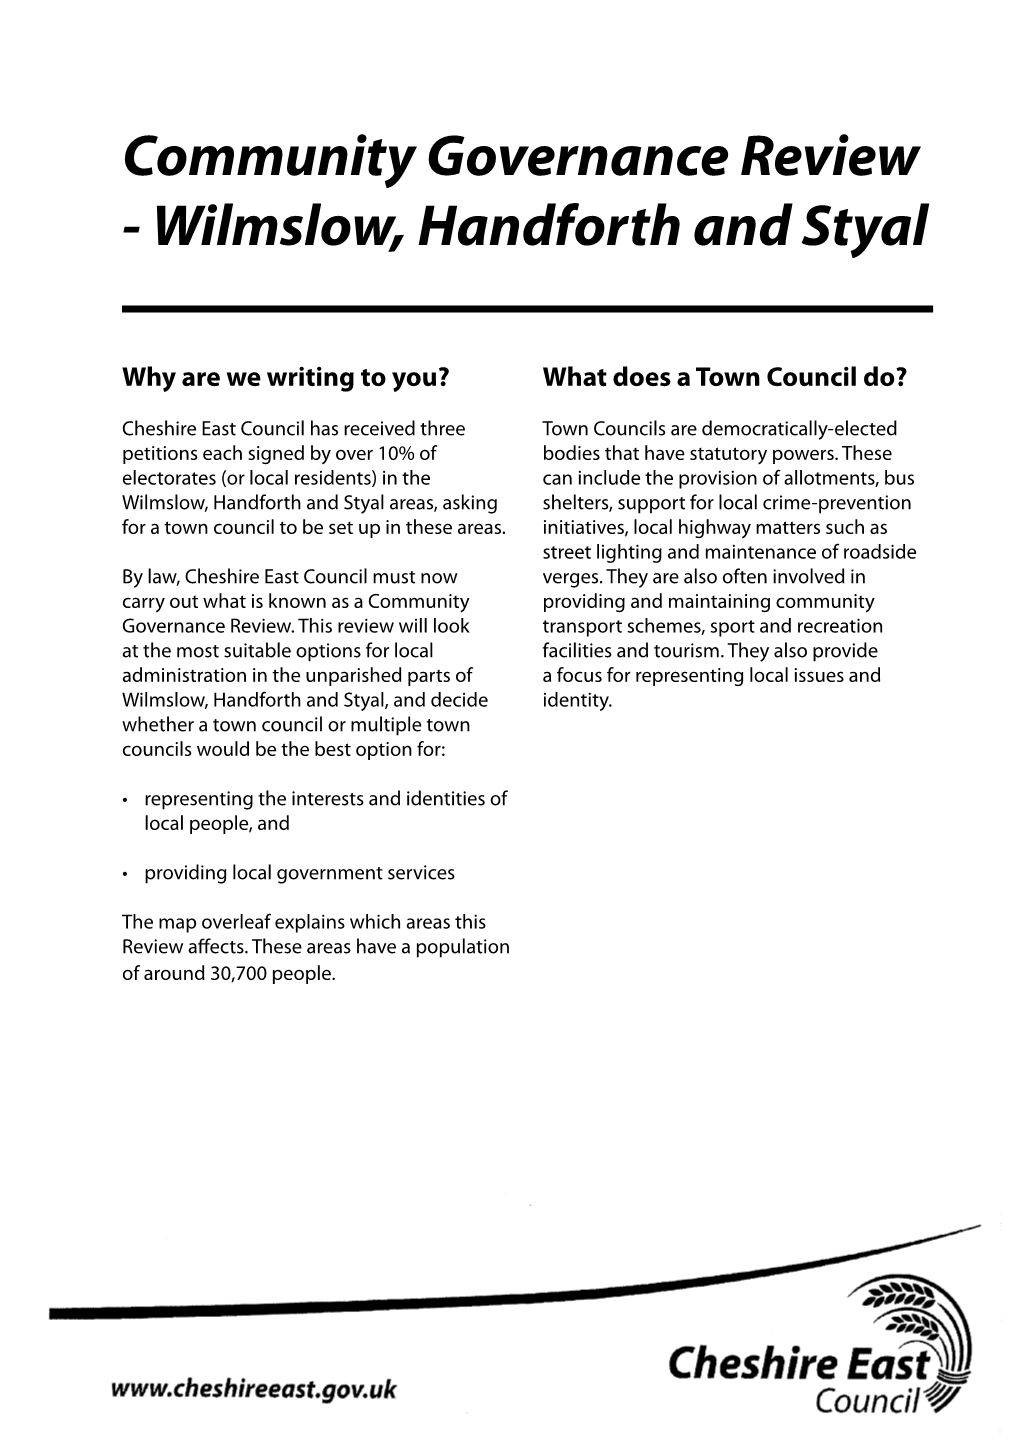 Community Governance Review - Wilmslow, Handforth and Styal